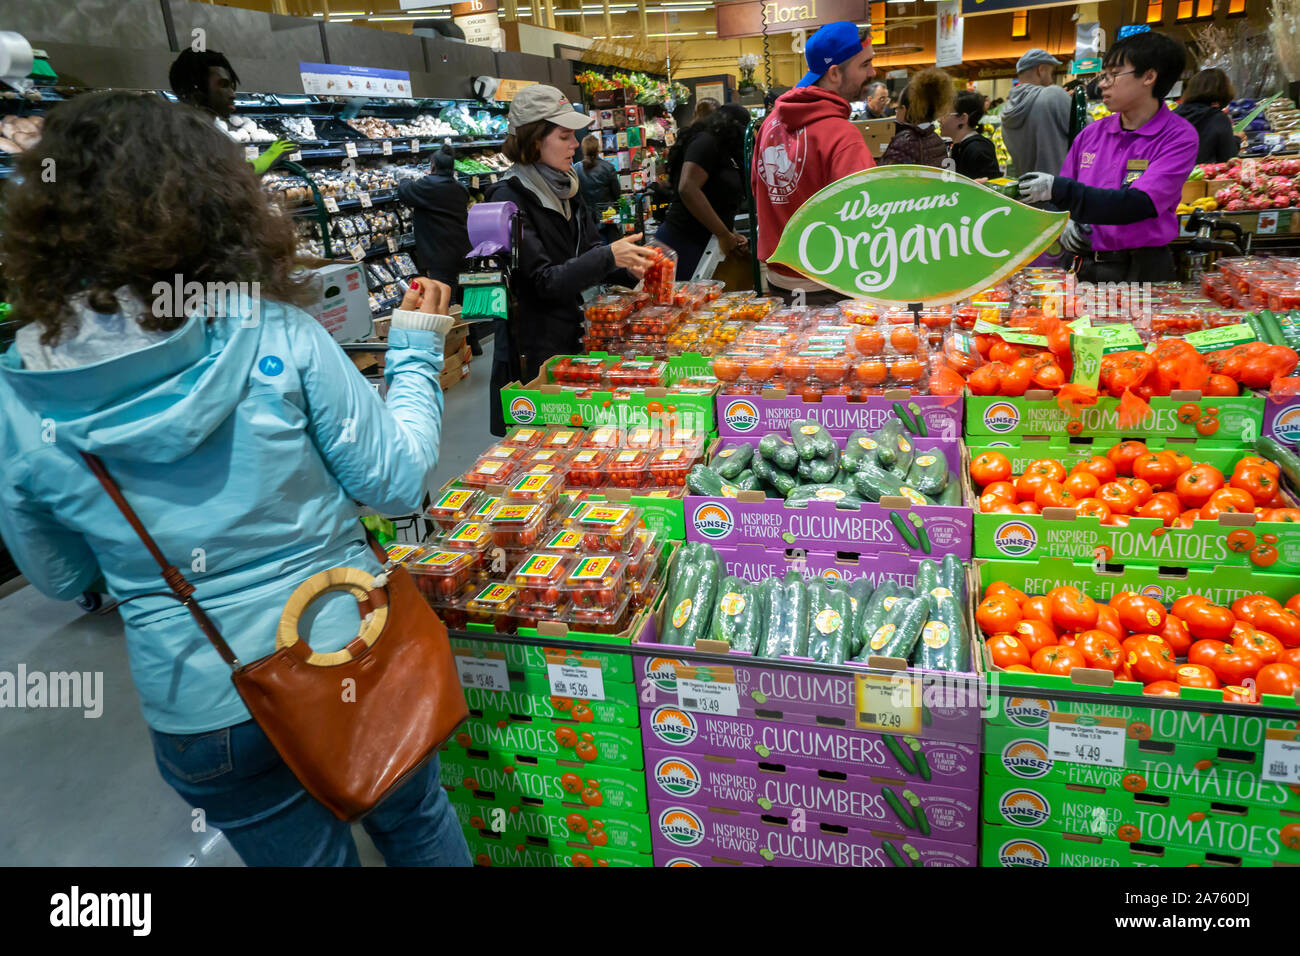 Thousands of excited shoppers flock to the Wegmans supermarket in Brooklyn in New York on its grand opening day, Sunday, October 27, 2019.  The chain, which has a cult-like following, opened its first store in New York City in the Brooklyn Navy Yard. The 74,000 square foot store is the 103 year old company’s 101st store and provided almost 600 jobs. (© Richard B. Levine) Stock Photo